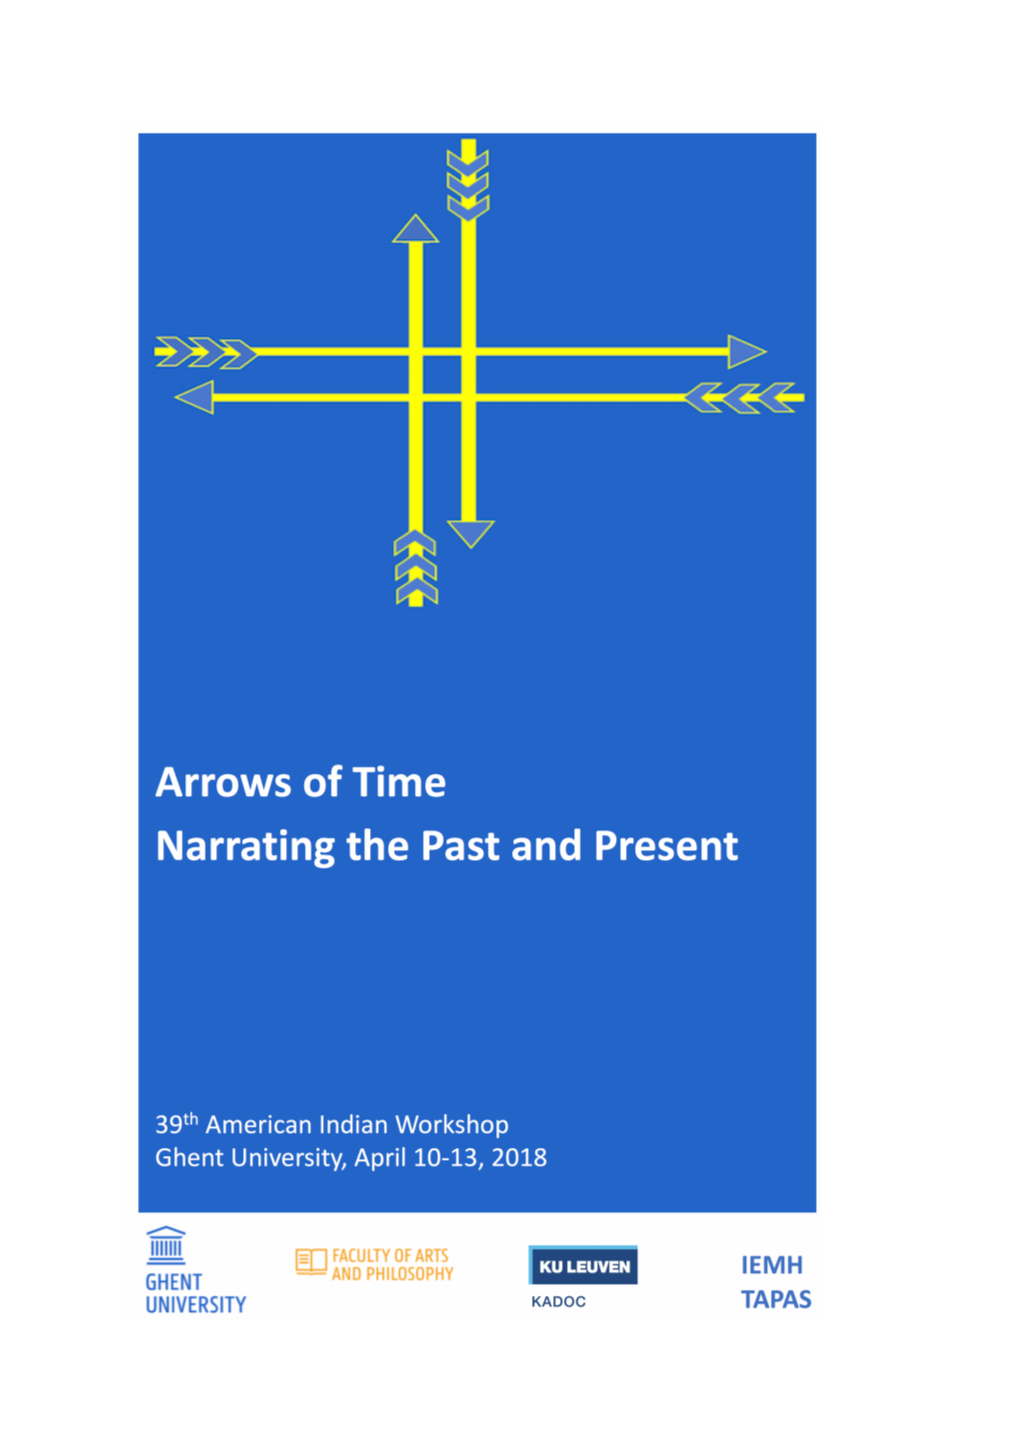 Arrows of Time: Narrating the Past and Present," Wish to Thank Everyone Who Submitted Proposals in Response to the Call for Papers